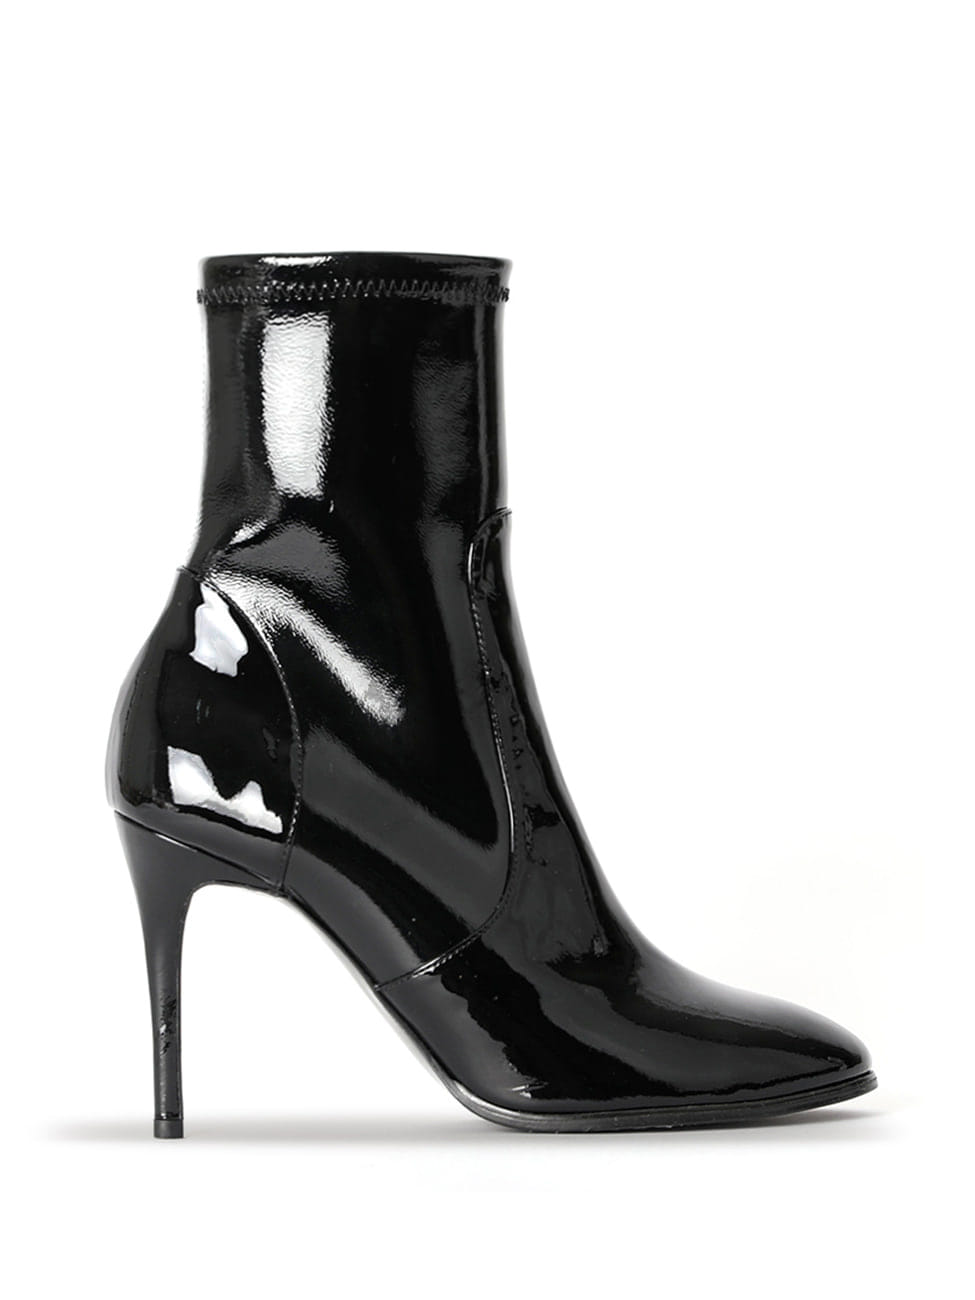 LINDA ANKLE BOOTS - BLACK PATENT